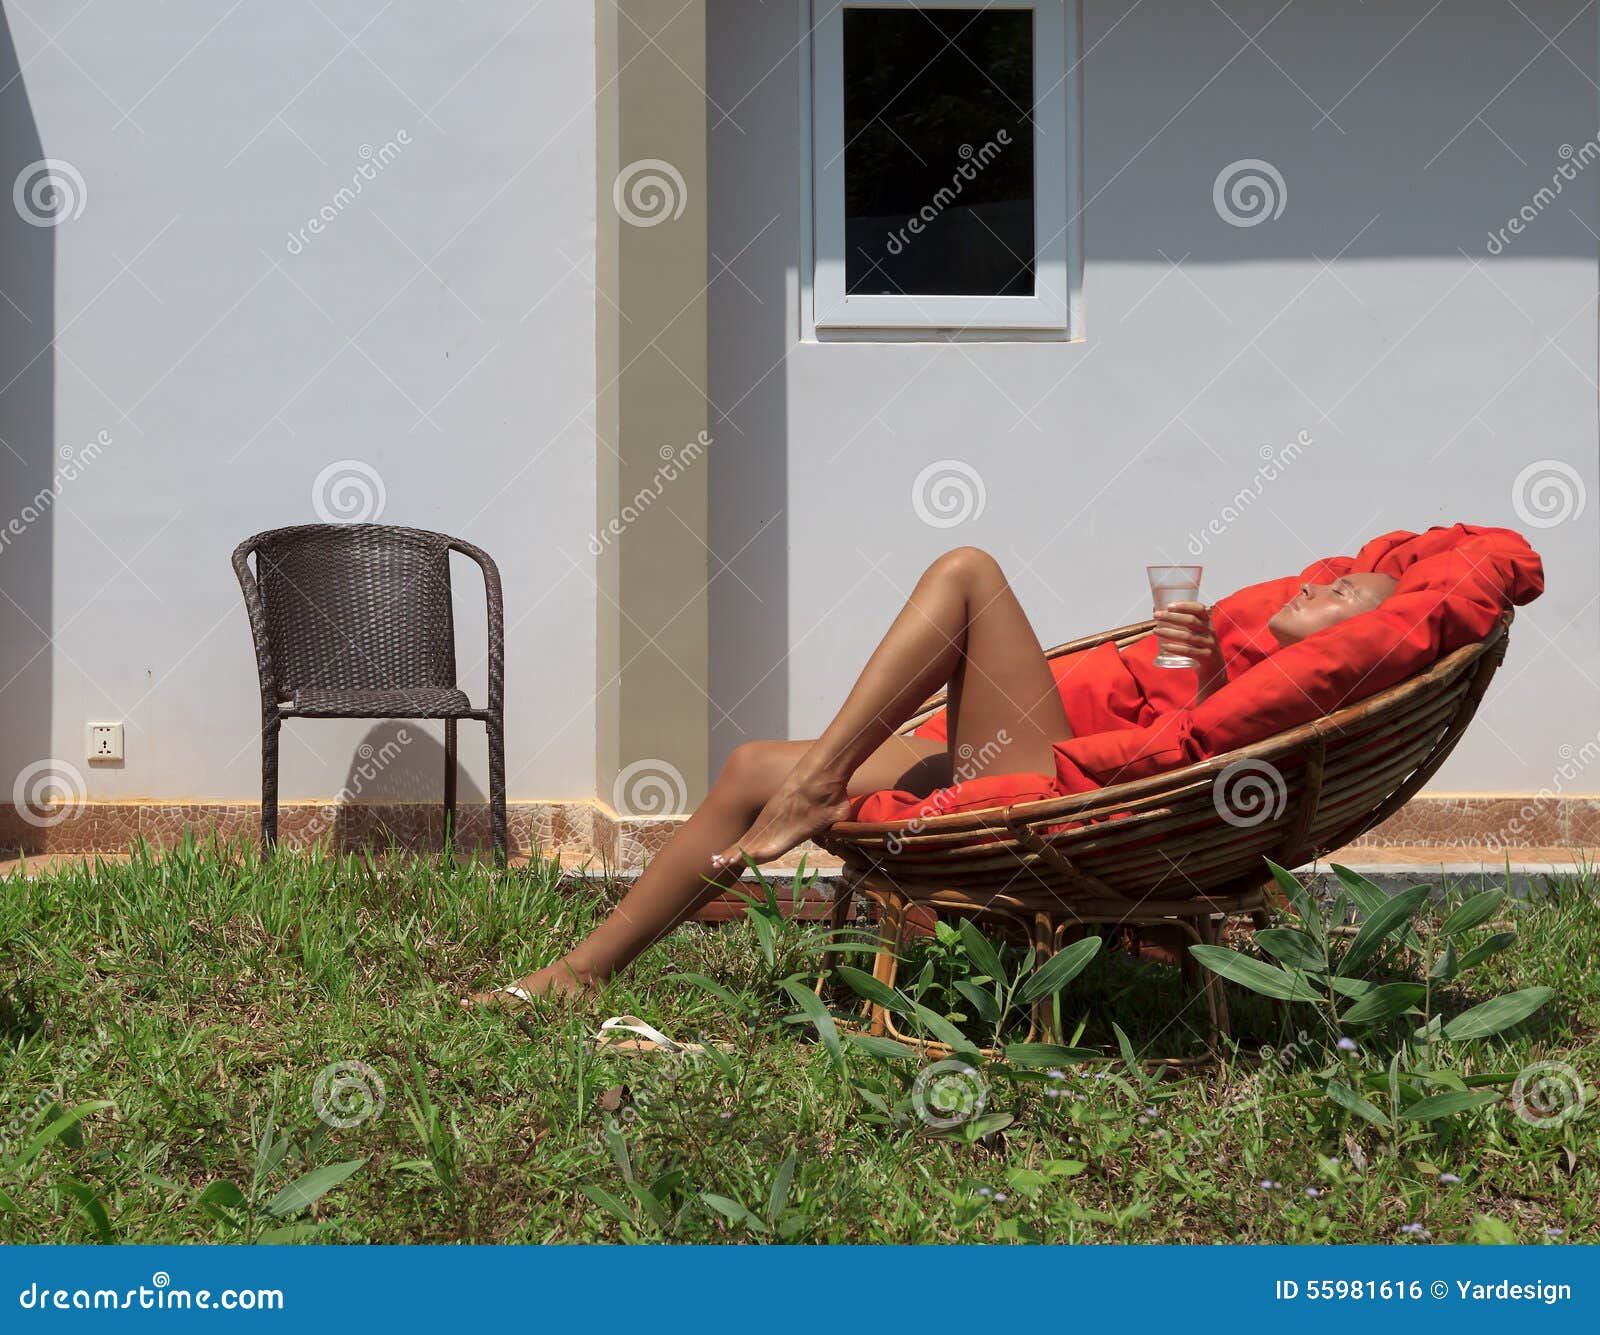 Large Backyard With A Lawn And Chairs Stock Photo Image 55981616